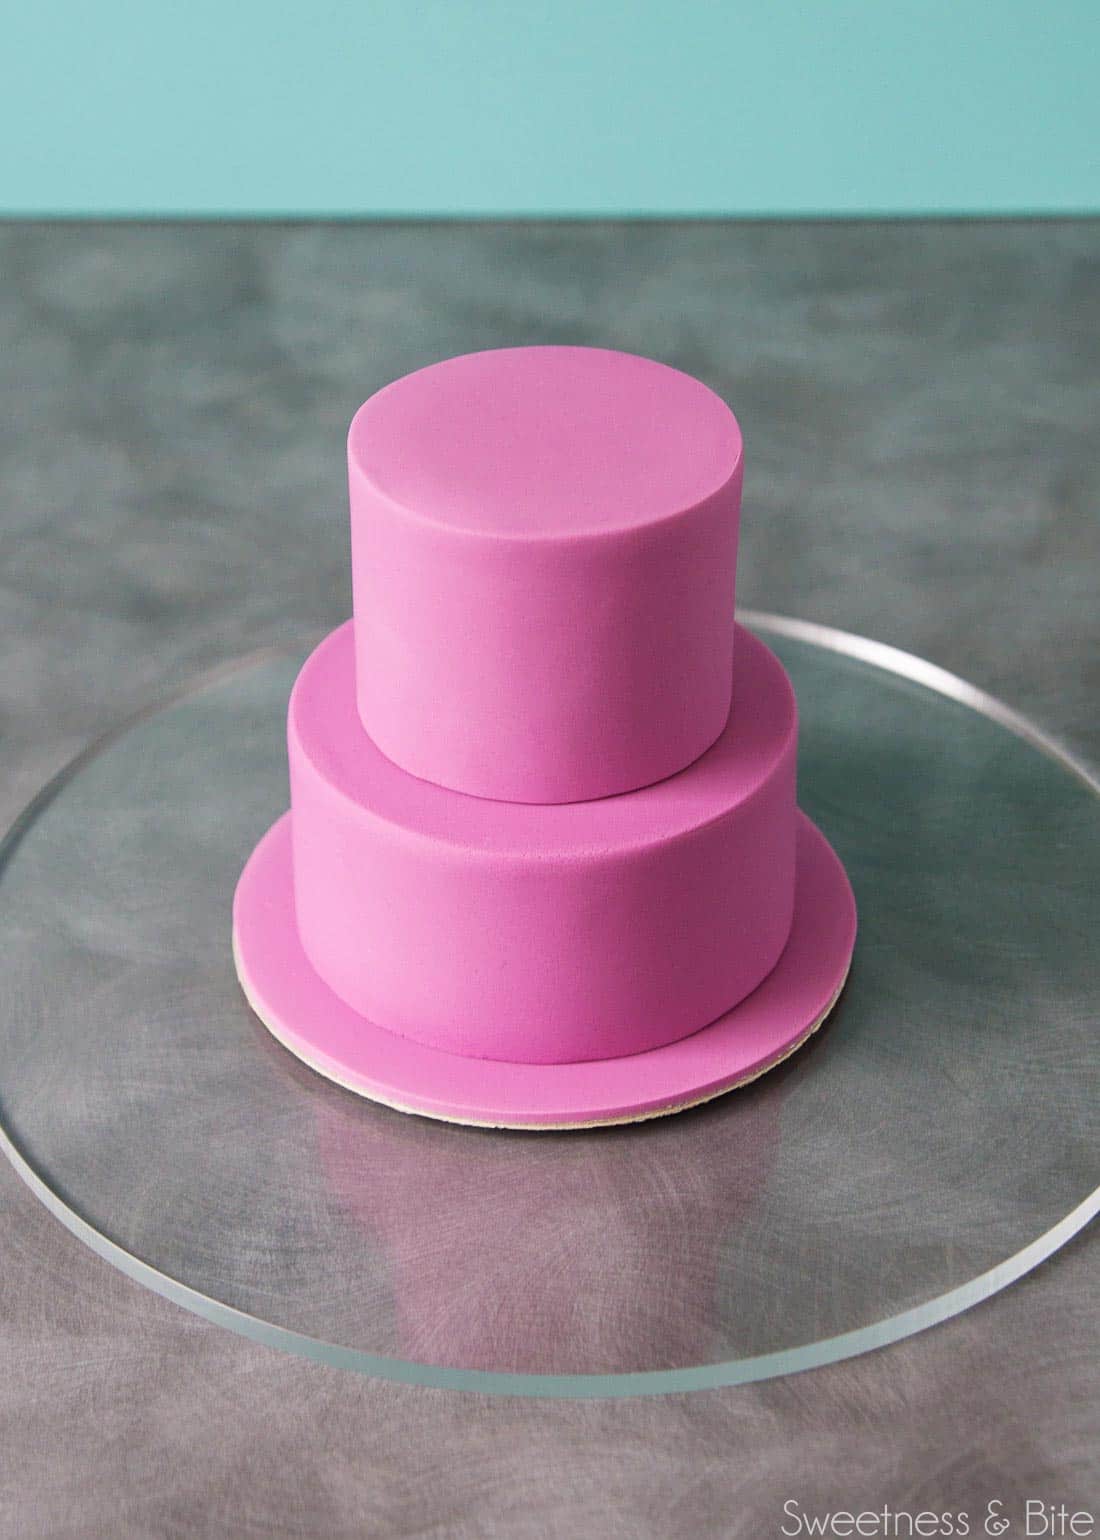 The two tiers of cake covered in purple fondant, stacked on the fondant covered cake board.